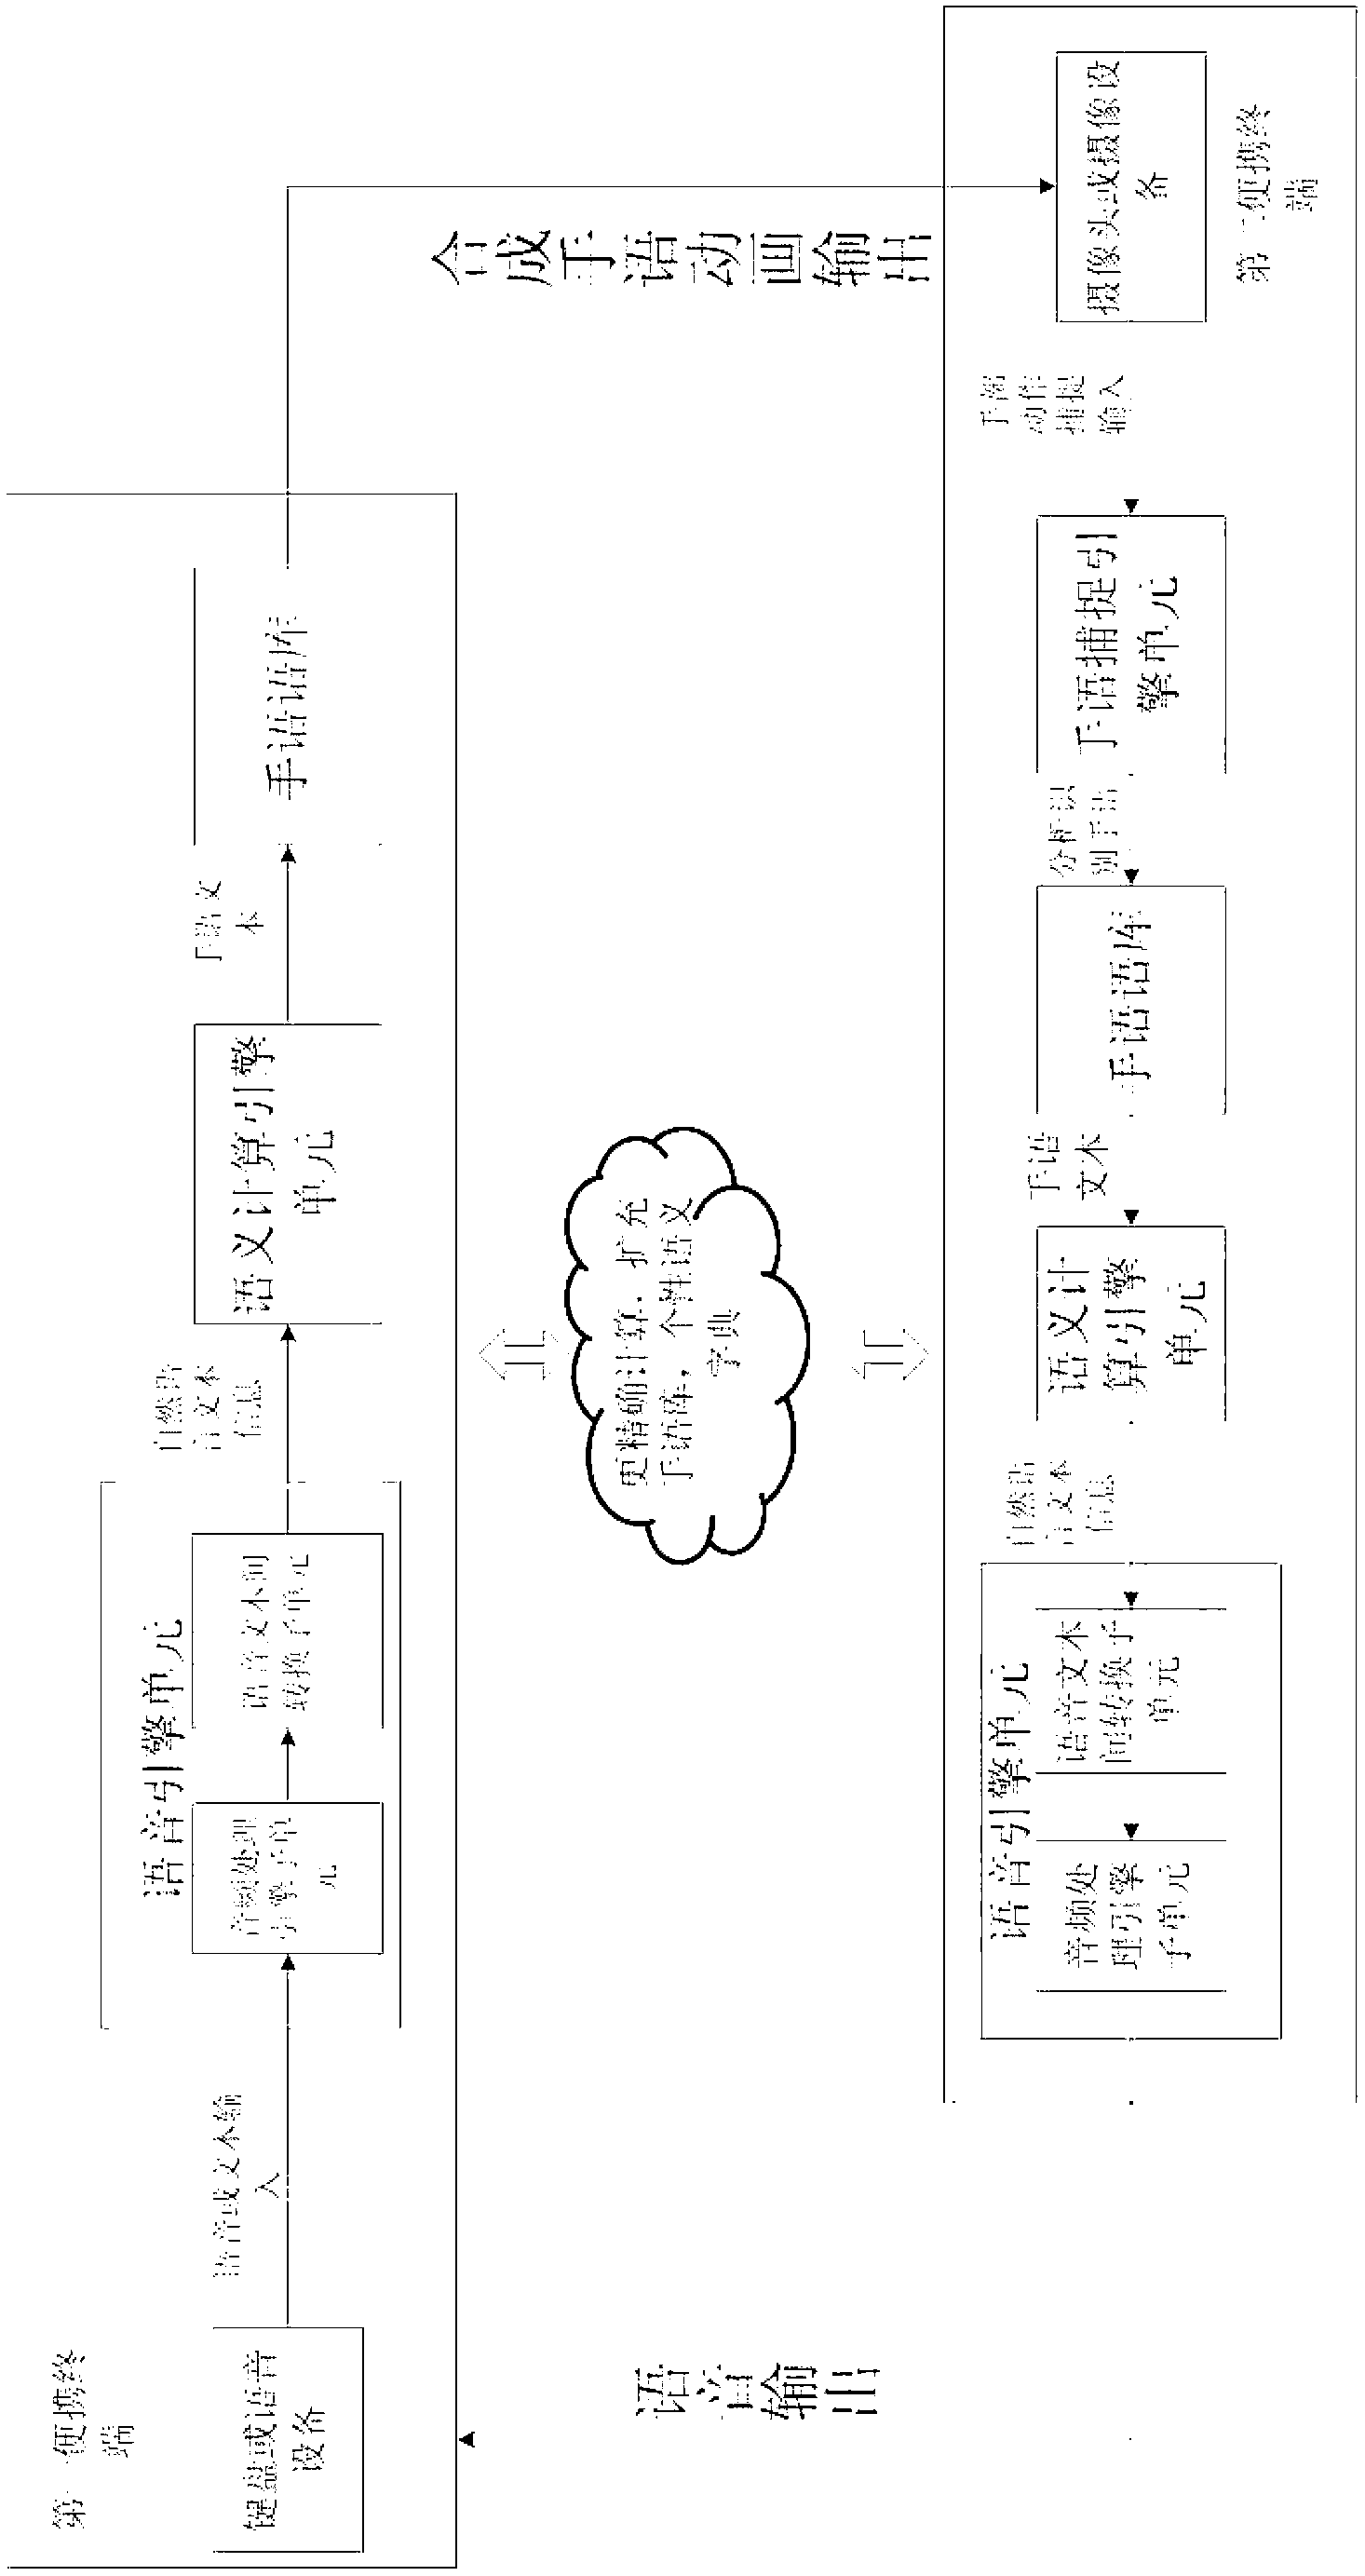 Semantic-computing-based interaction system and method for person with hearing or language disorder